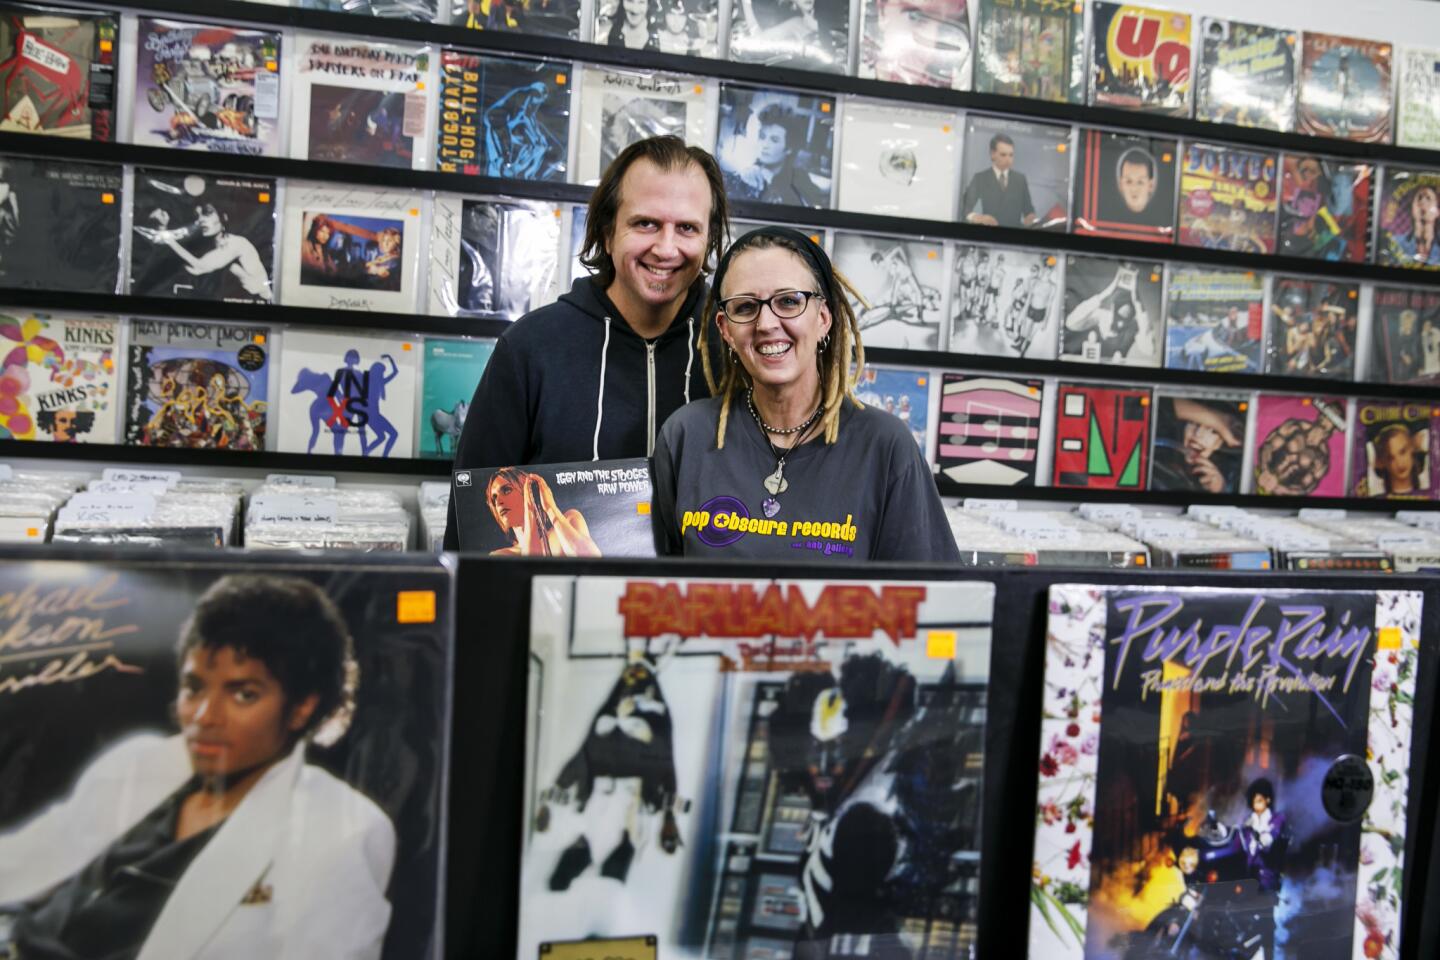 Pop Obscure Records owners Dustin Lane and Sherry Lee.